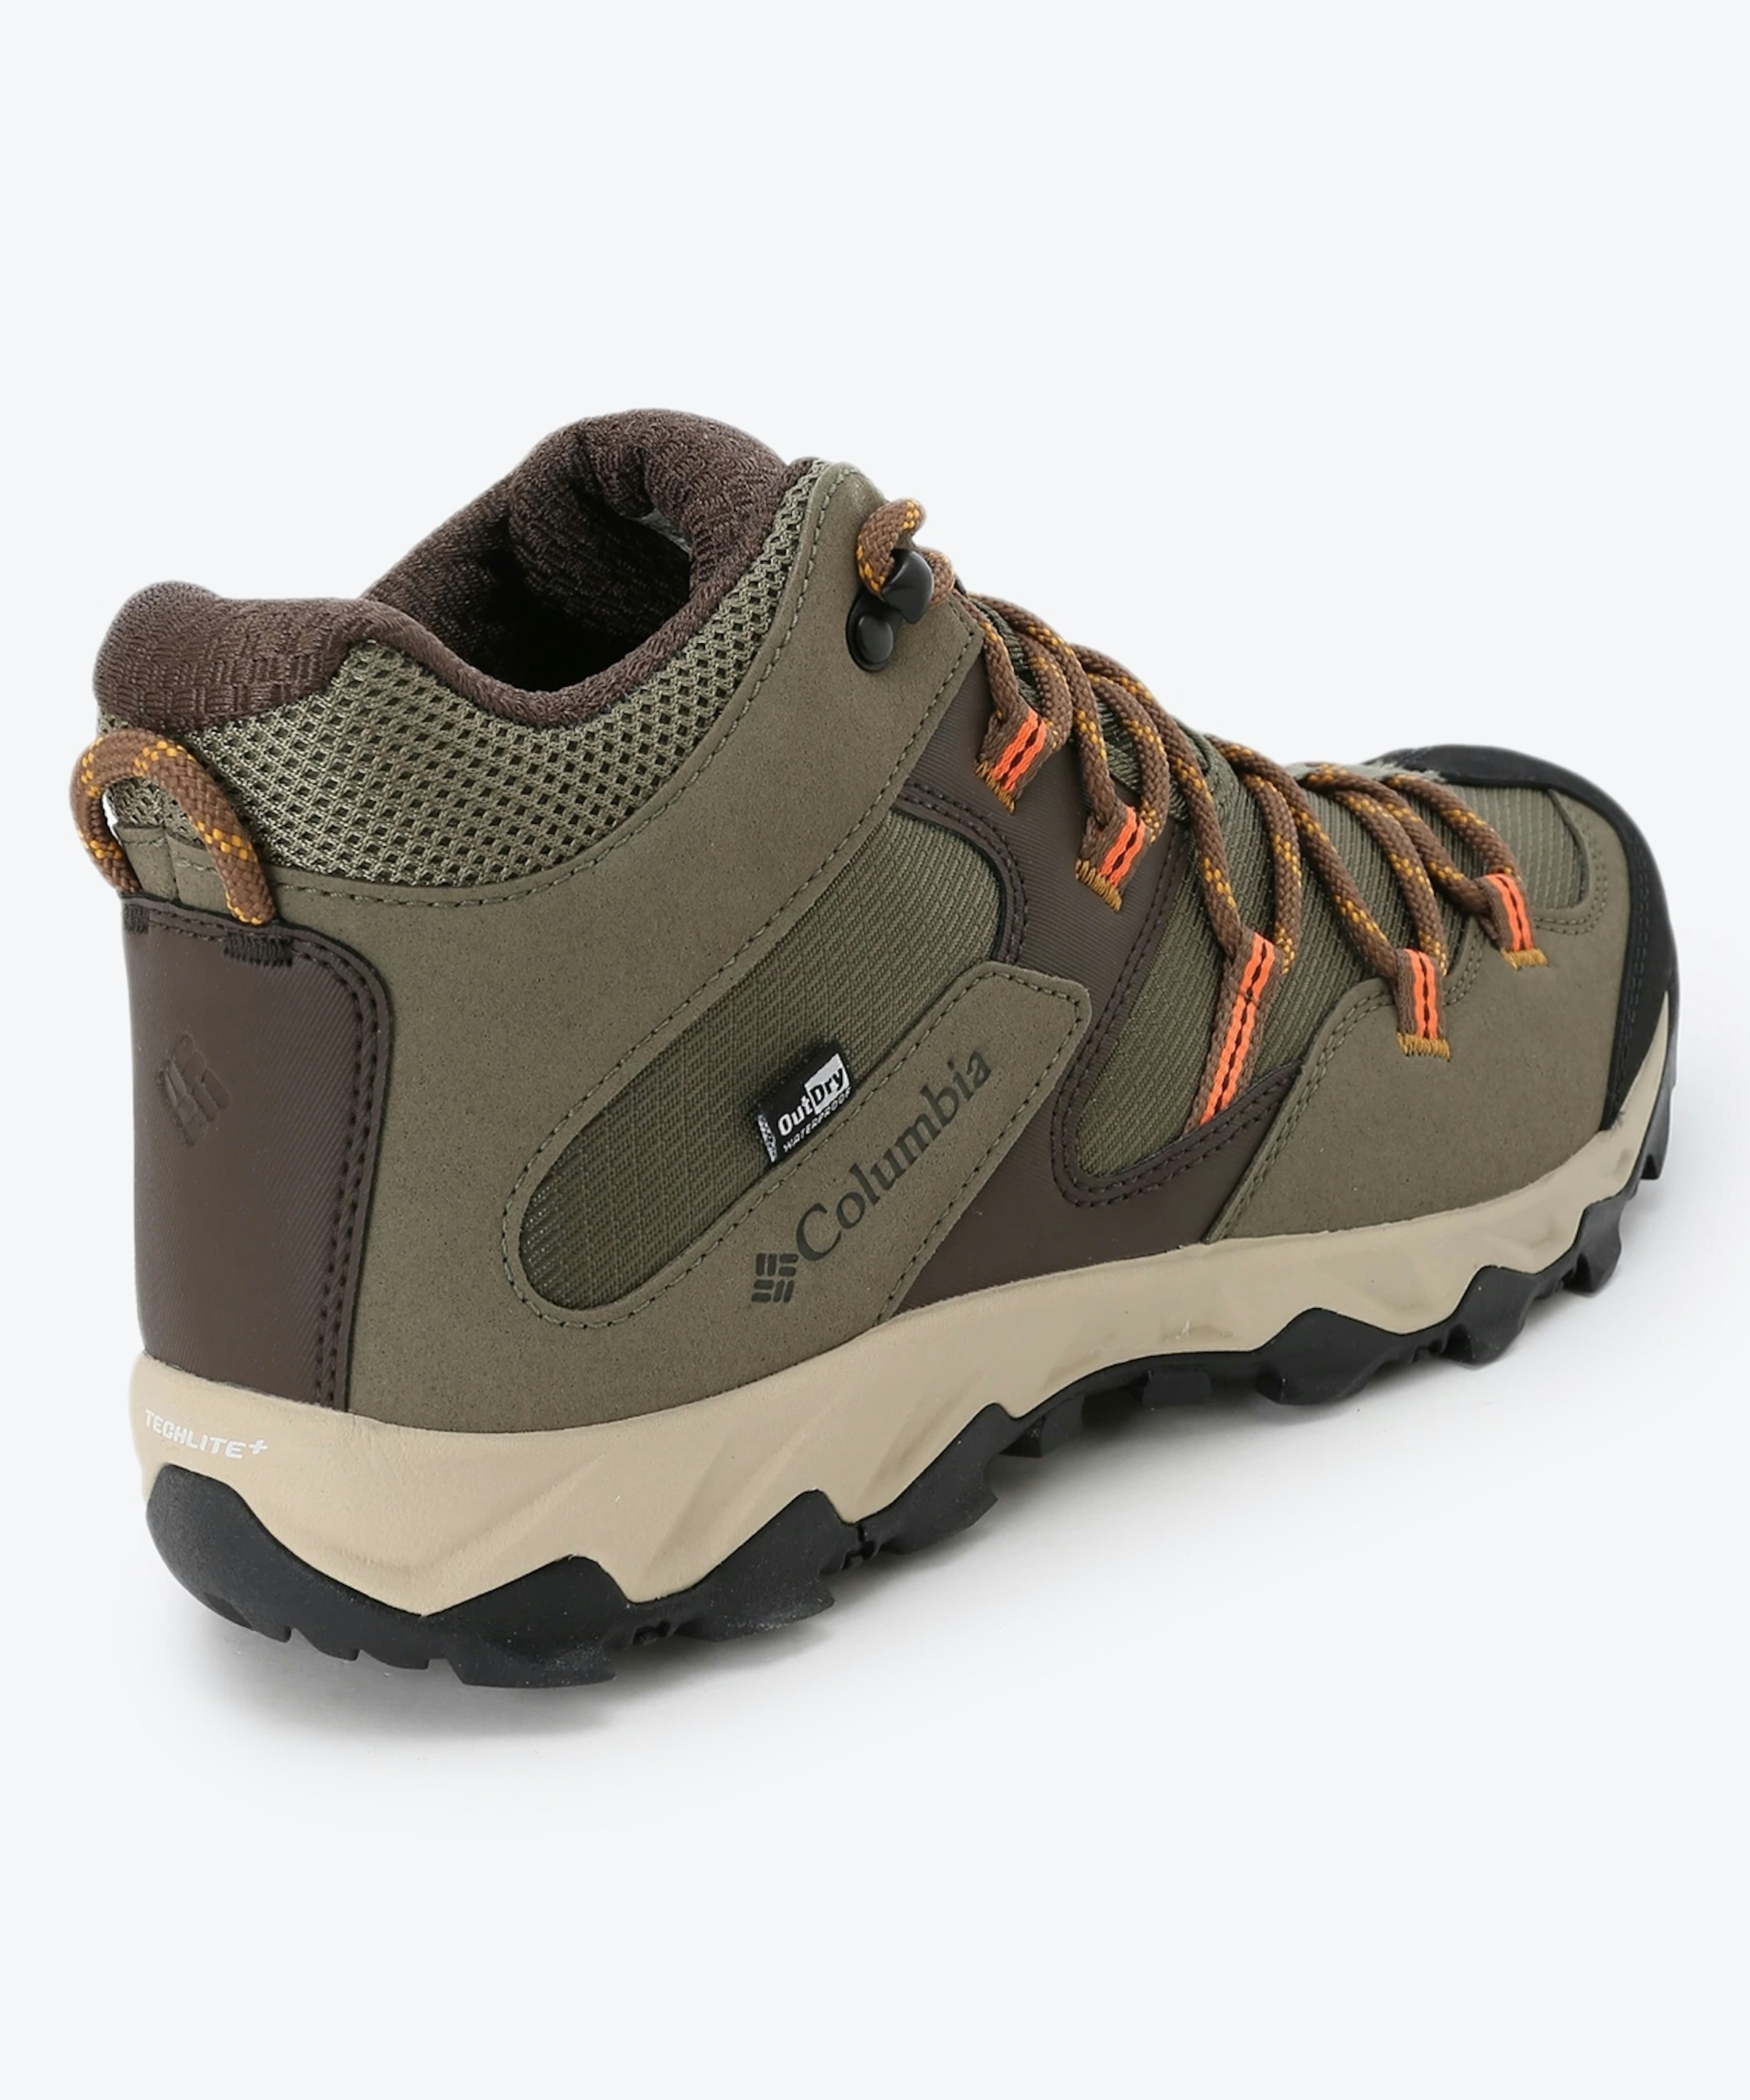 'OutDry' has been adopted since the previous model, 'Saber IV'. The tag is located near the ankle.